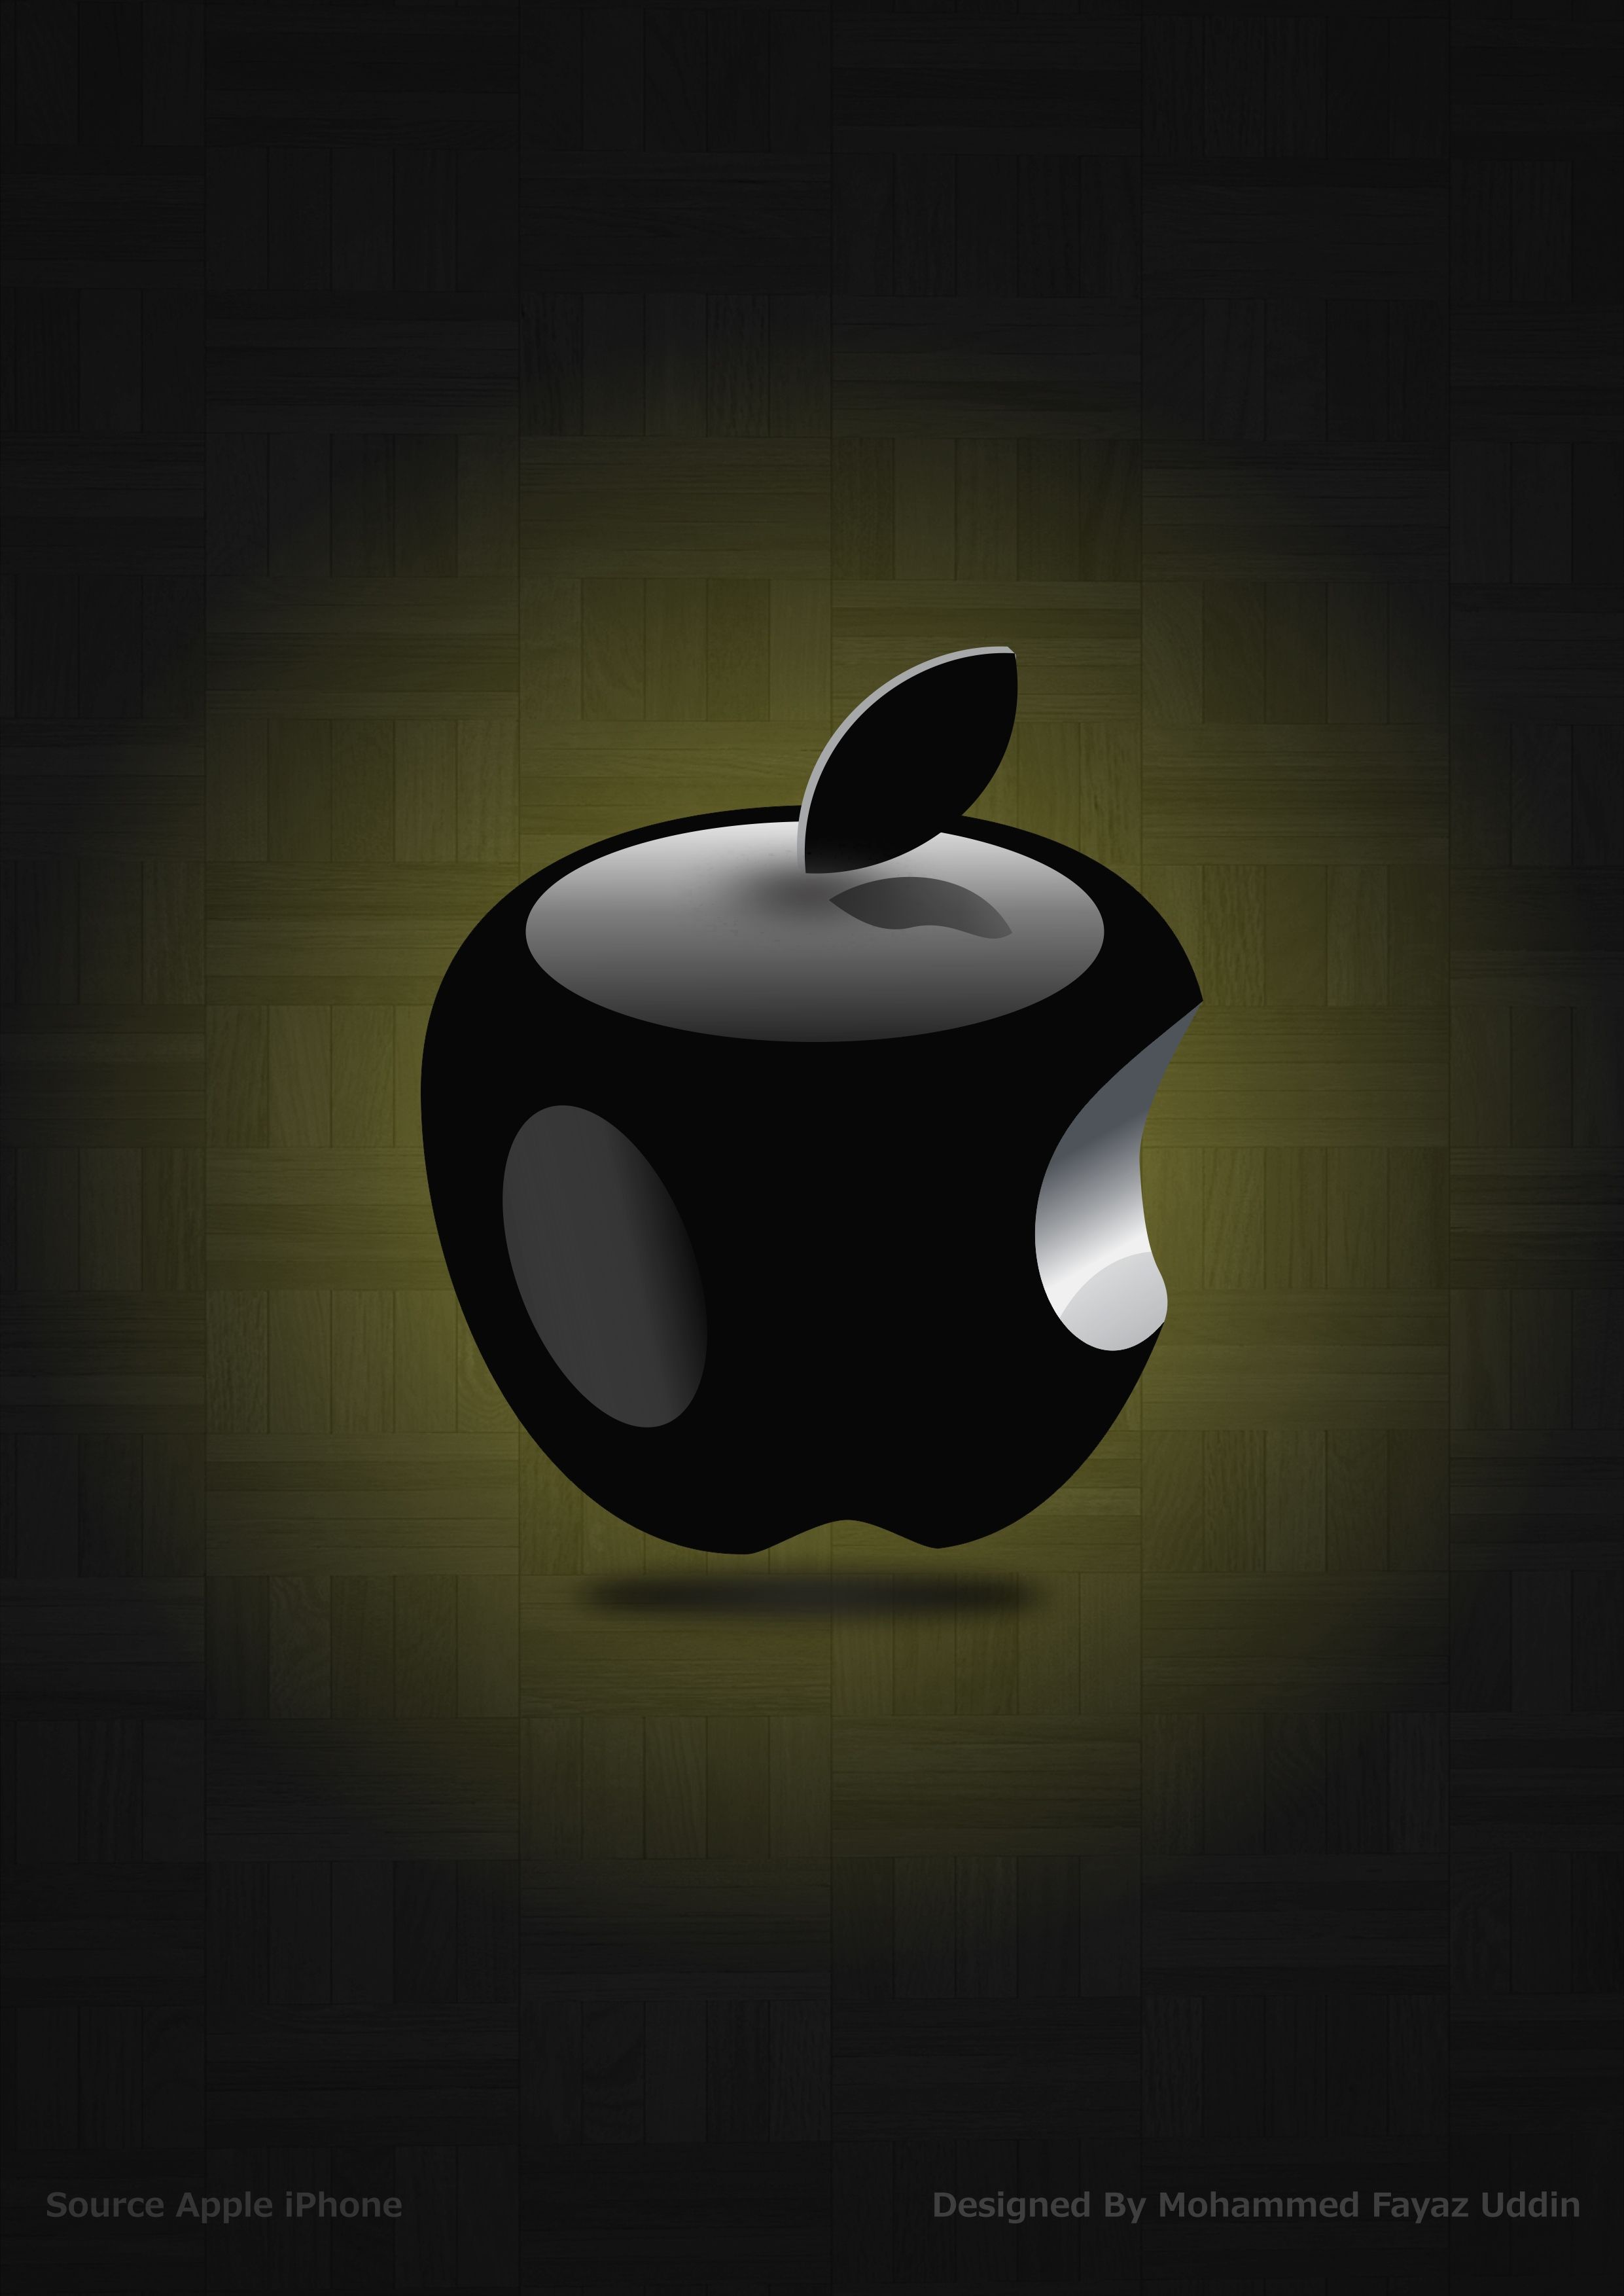 3D Apple Logo HD Wallpaper Design For iPhone & Android, Download